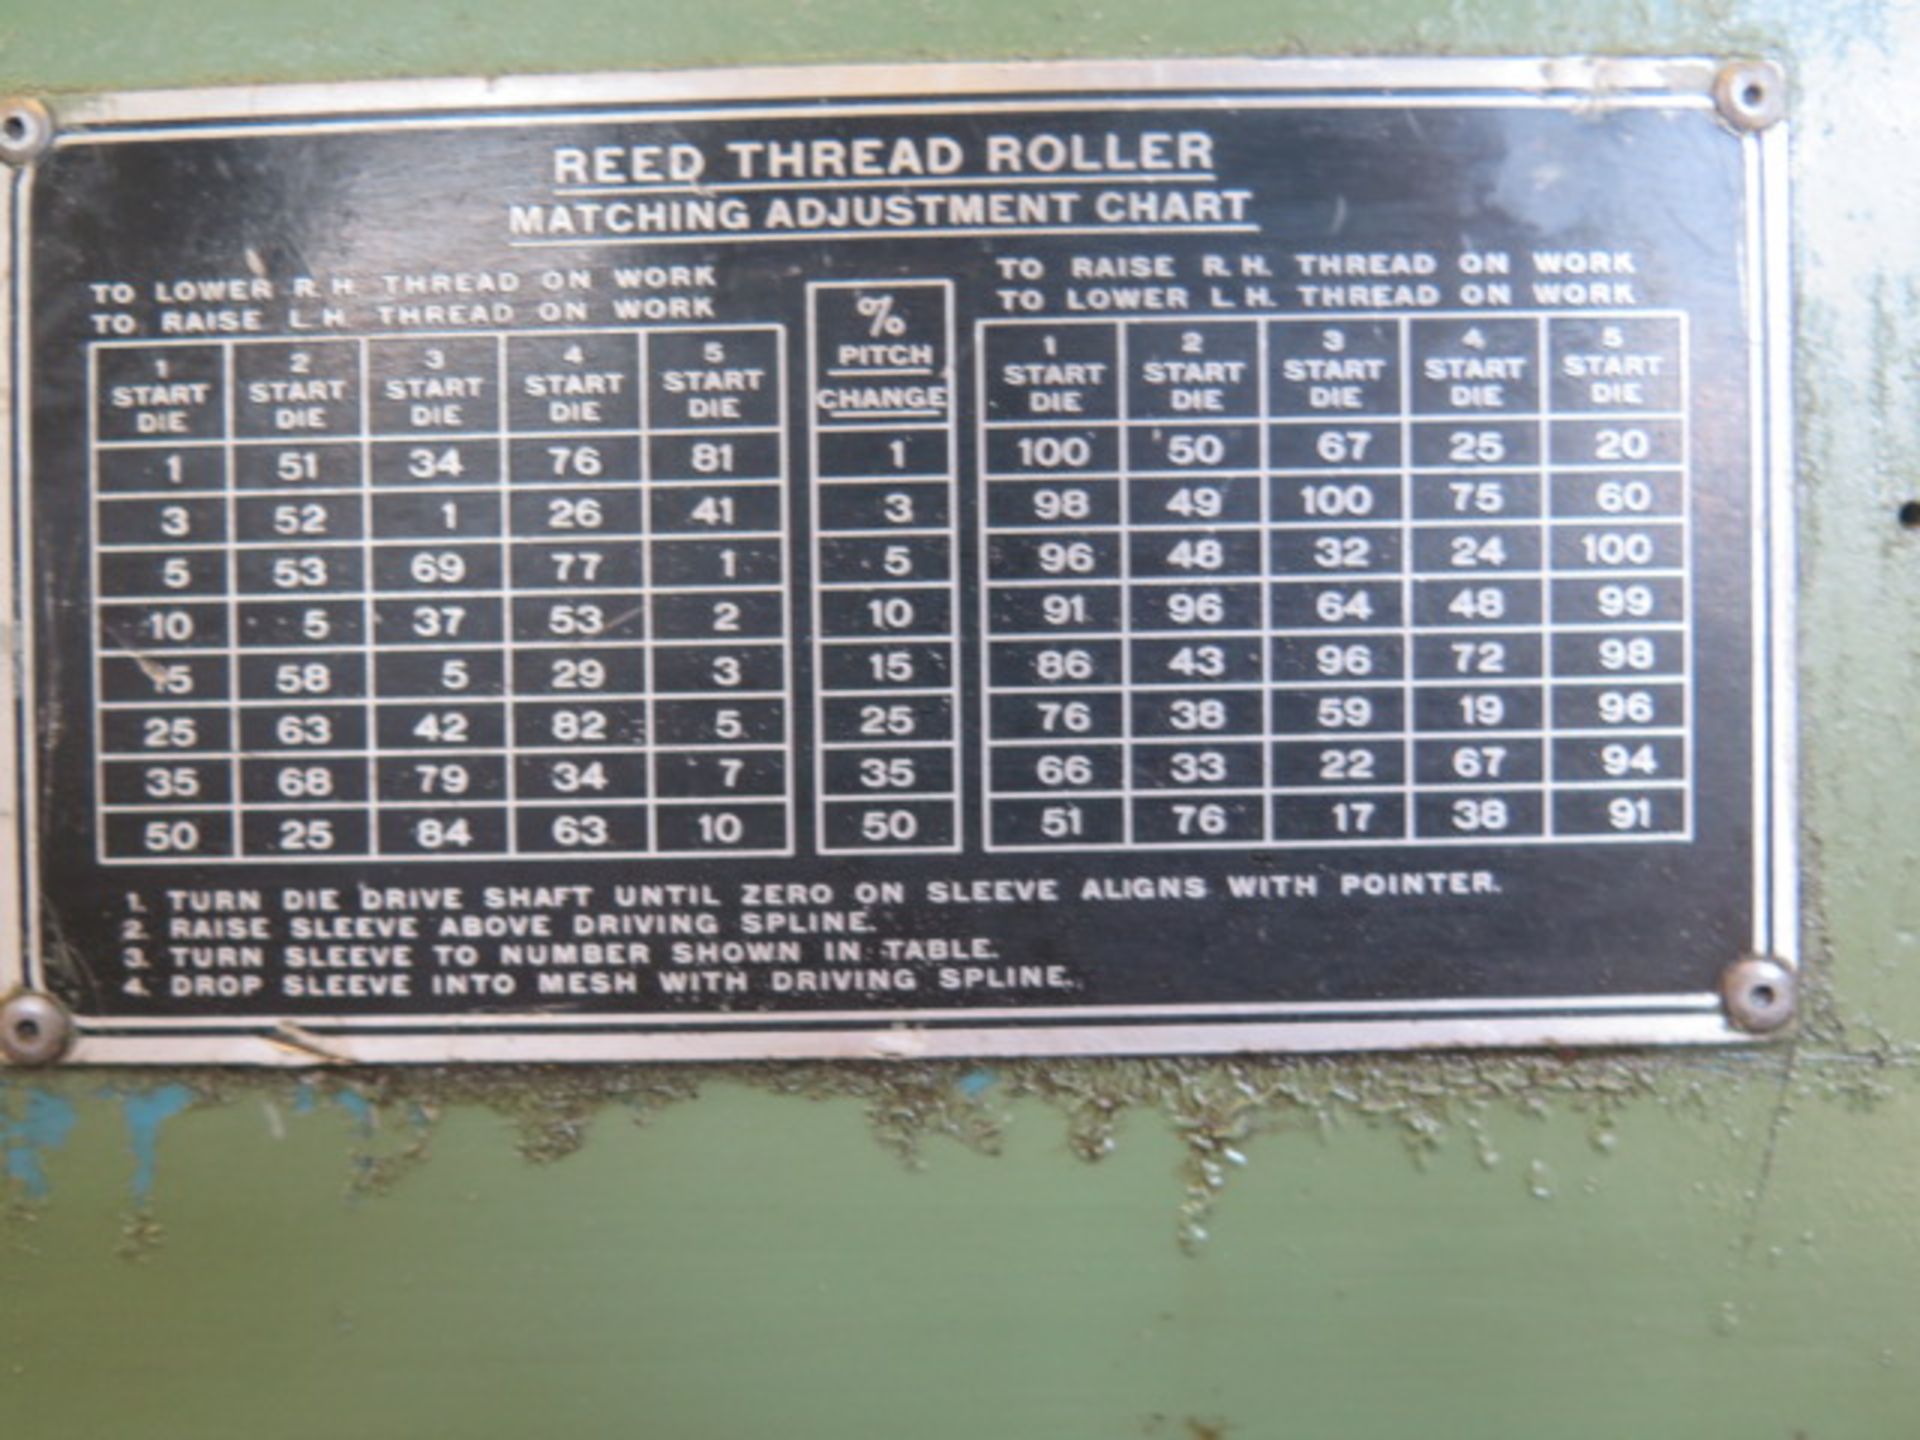 Reed-Rico A-22 3 ¾” Cap. 3-Die Cylindrical Thread Rolling Machine s/n A22-487 - Image 9 of 10